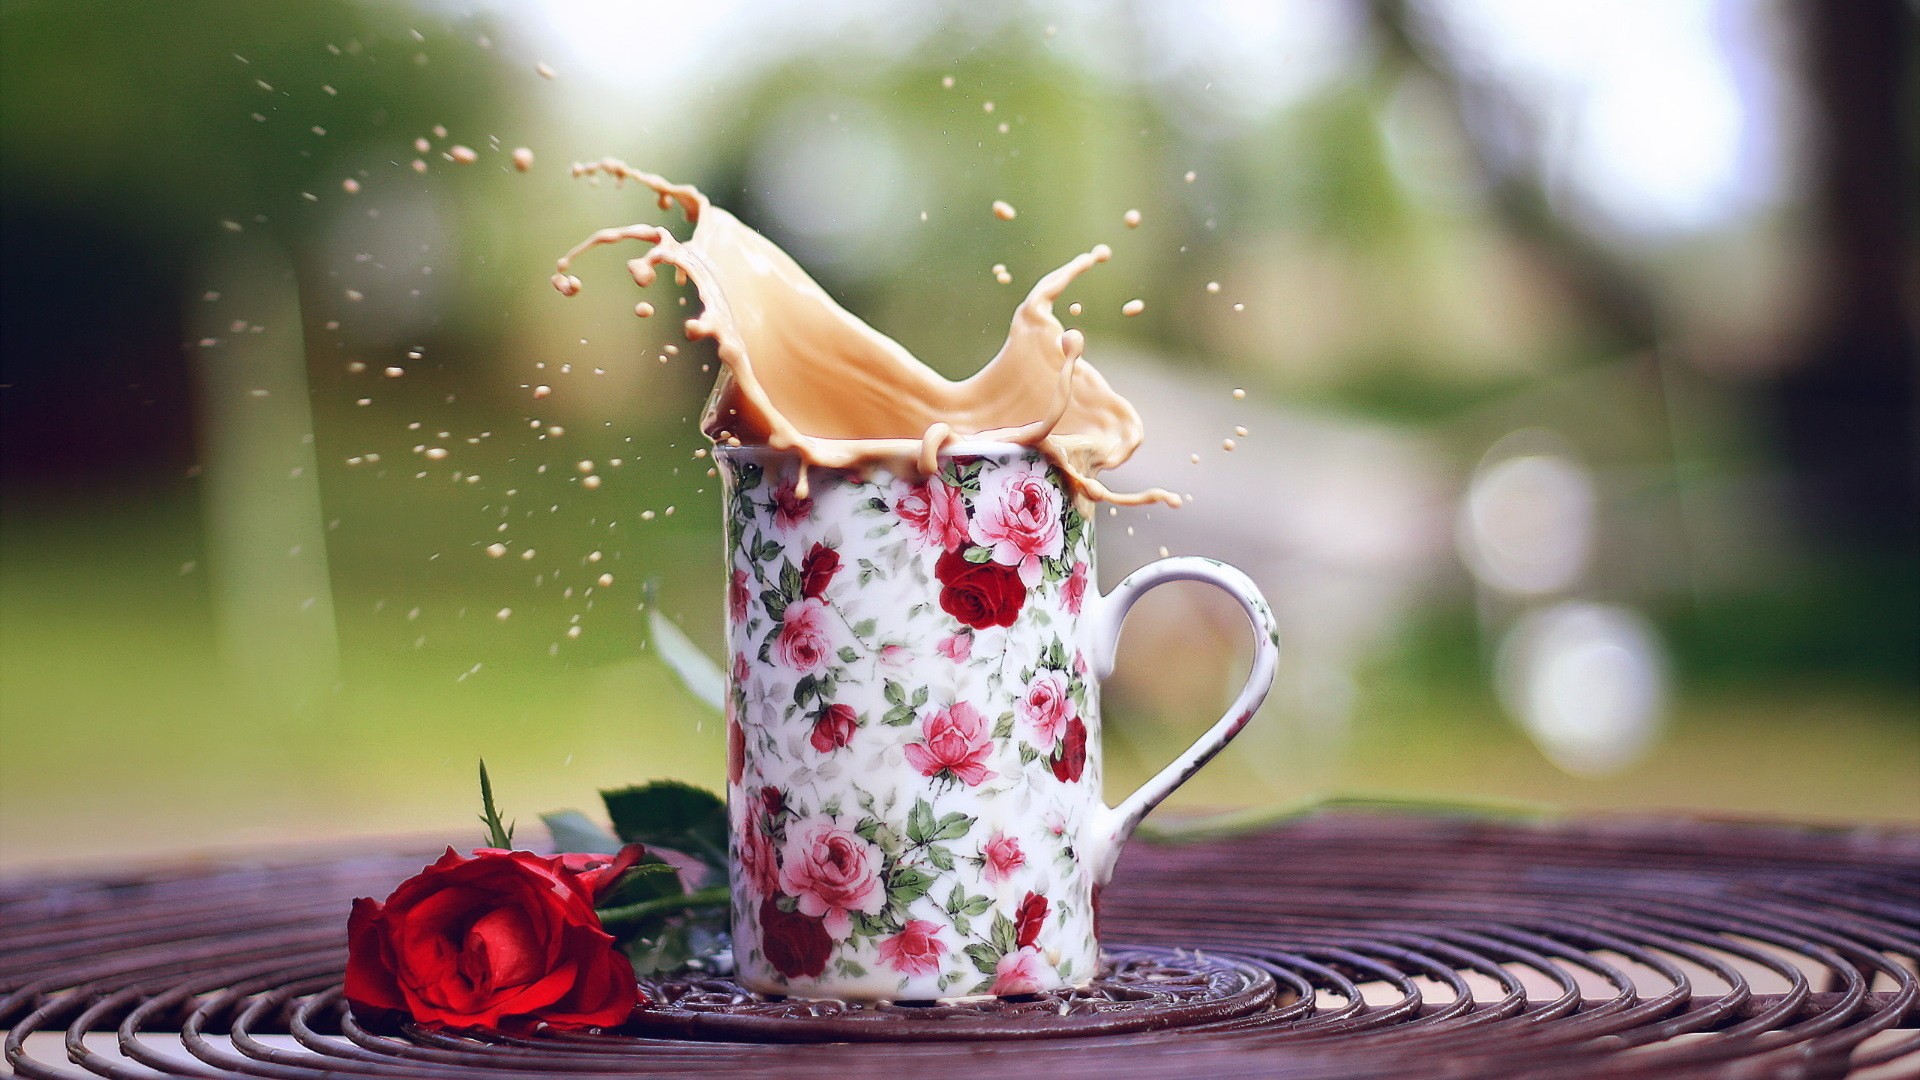 General 1920x1080 rose flowers cup coffee splashes